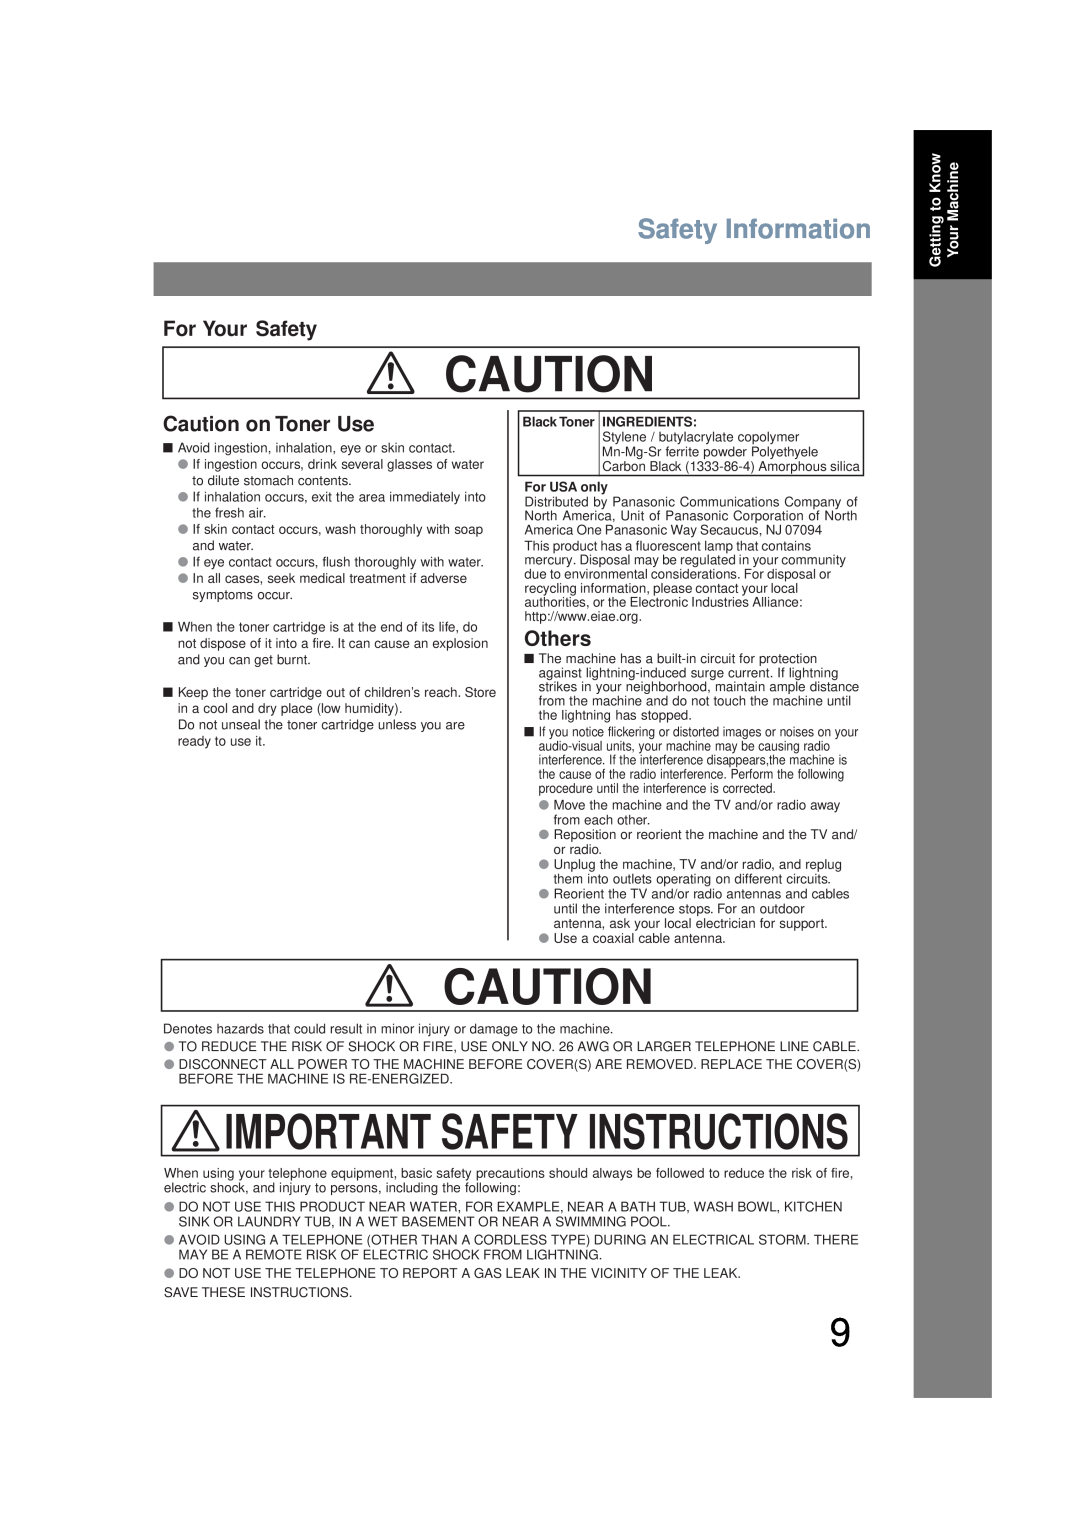 Panasonic UF-6200 Caution on Toner Use, Others, Important Safety Instructions, Safety Information, For Your Safety 